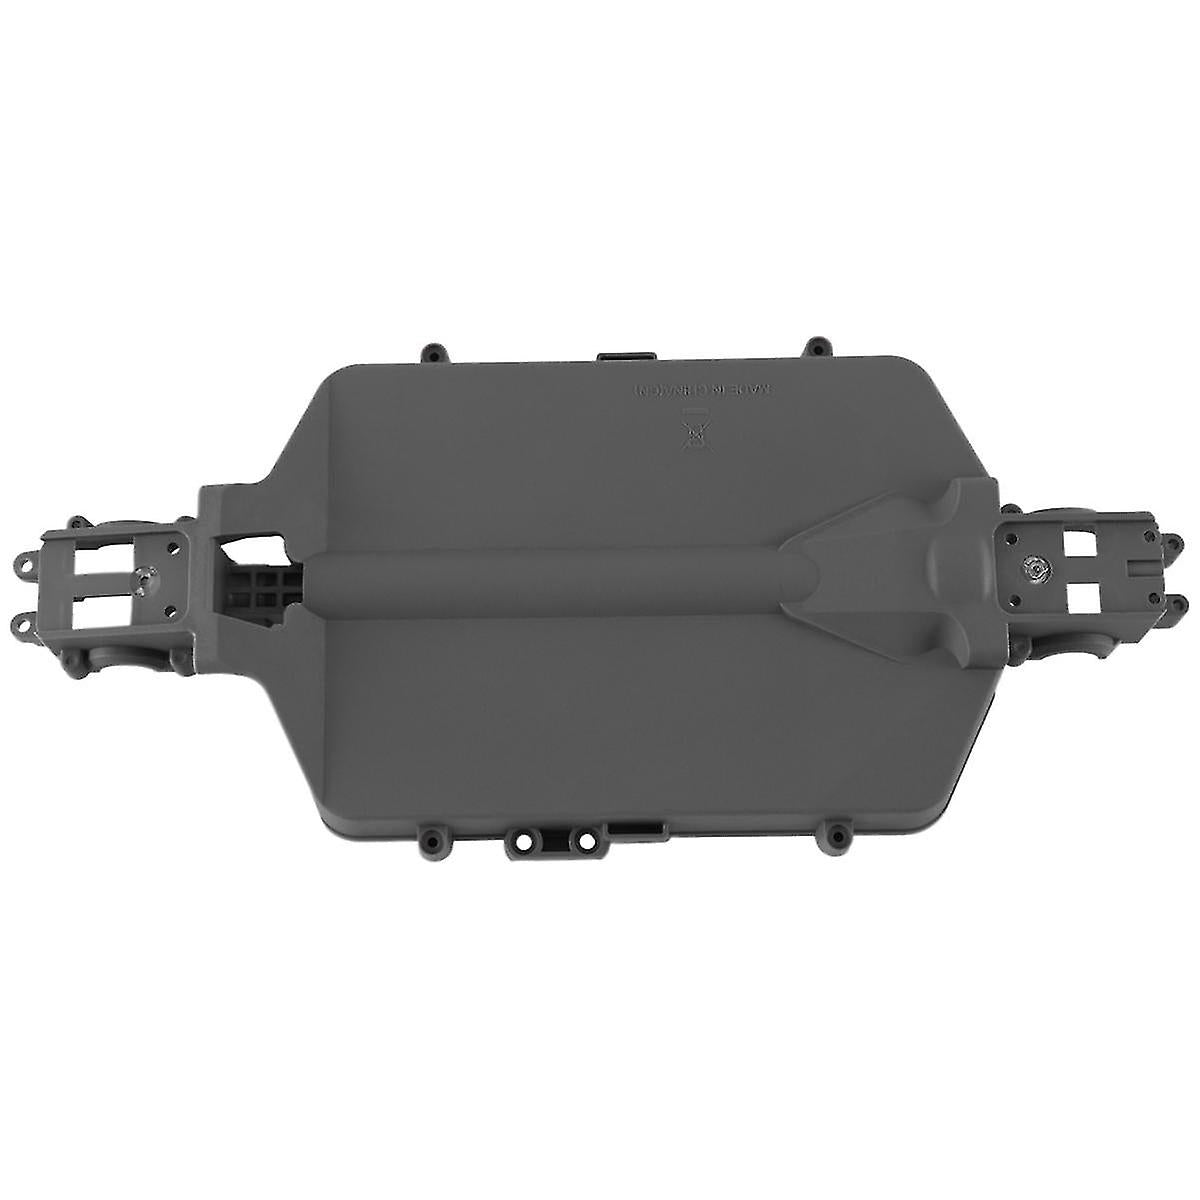 MJX HyperGo 16150M Original Replacement Chassis For M162 & M163